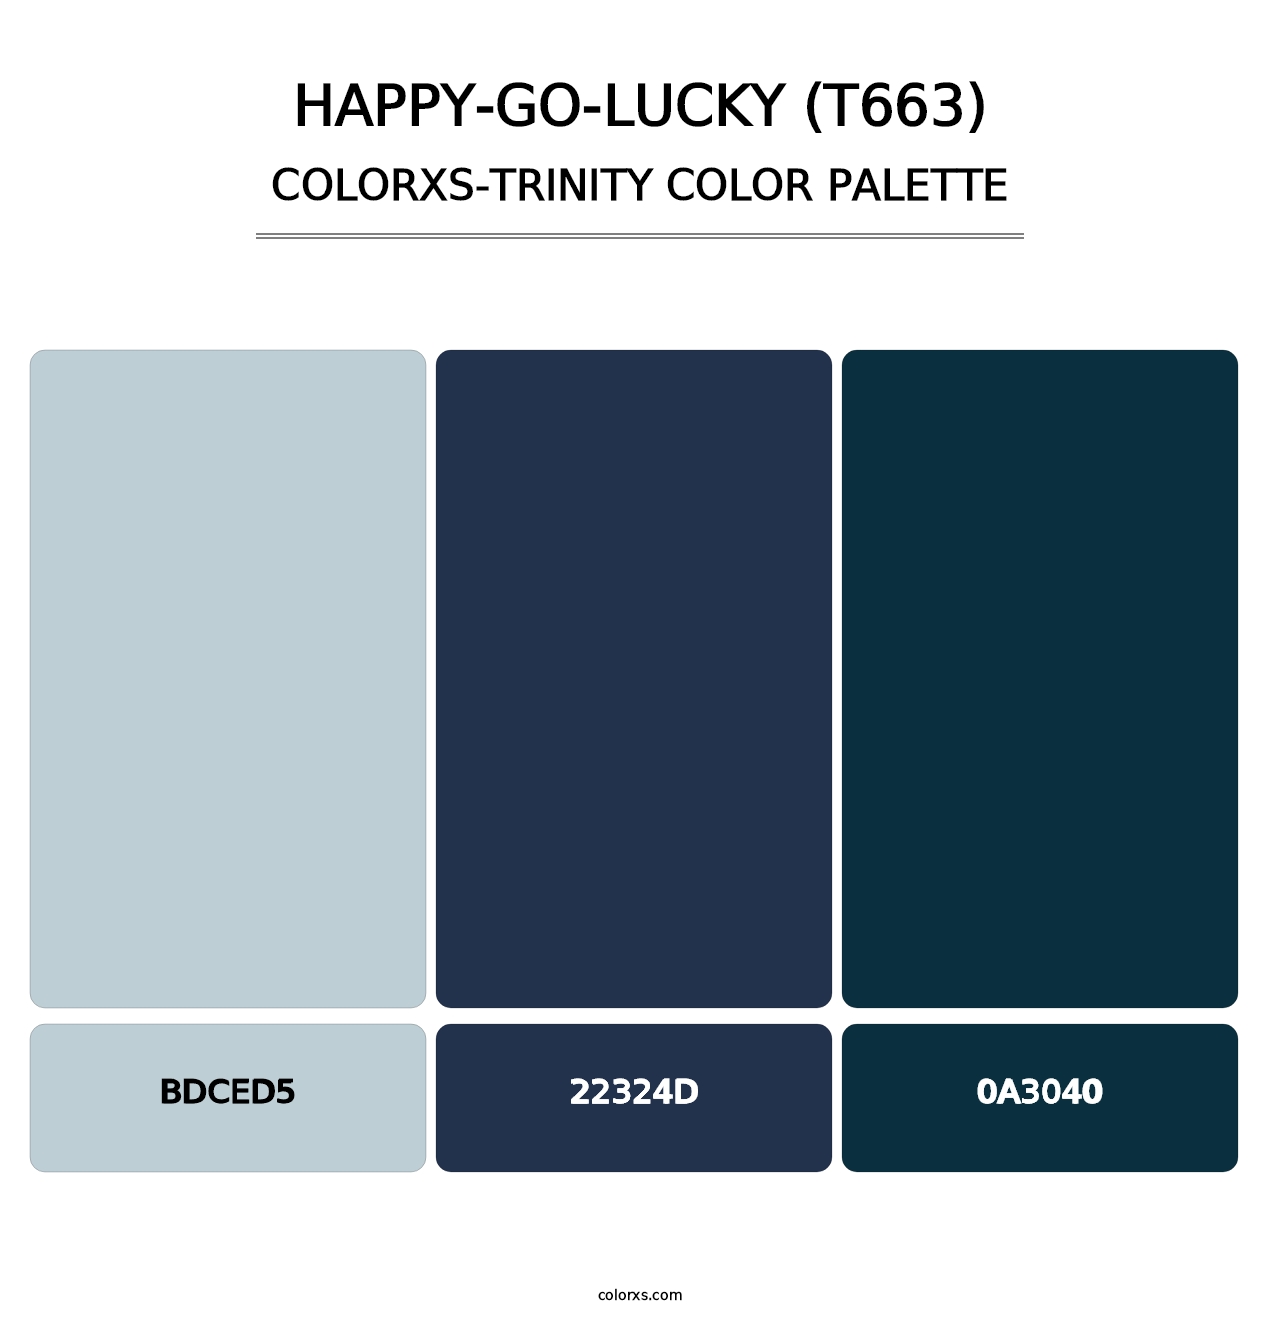 Happy-Go-Lucky (T663) - Colorxs Trinity Palette